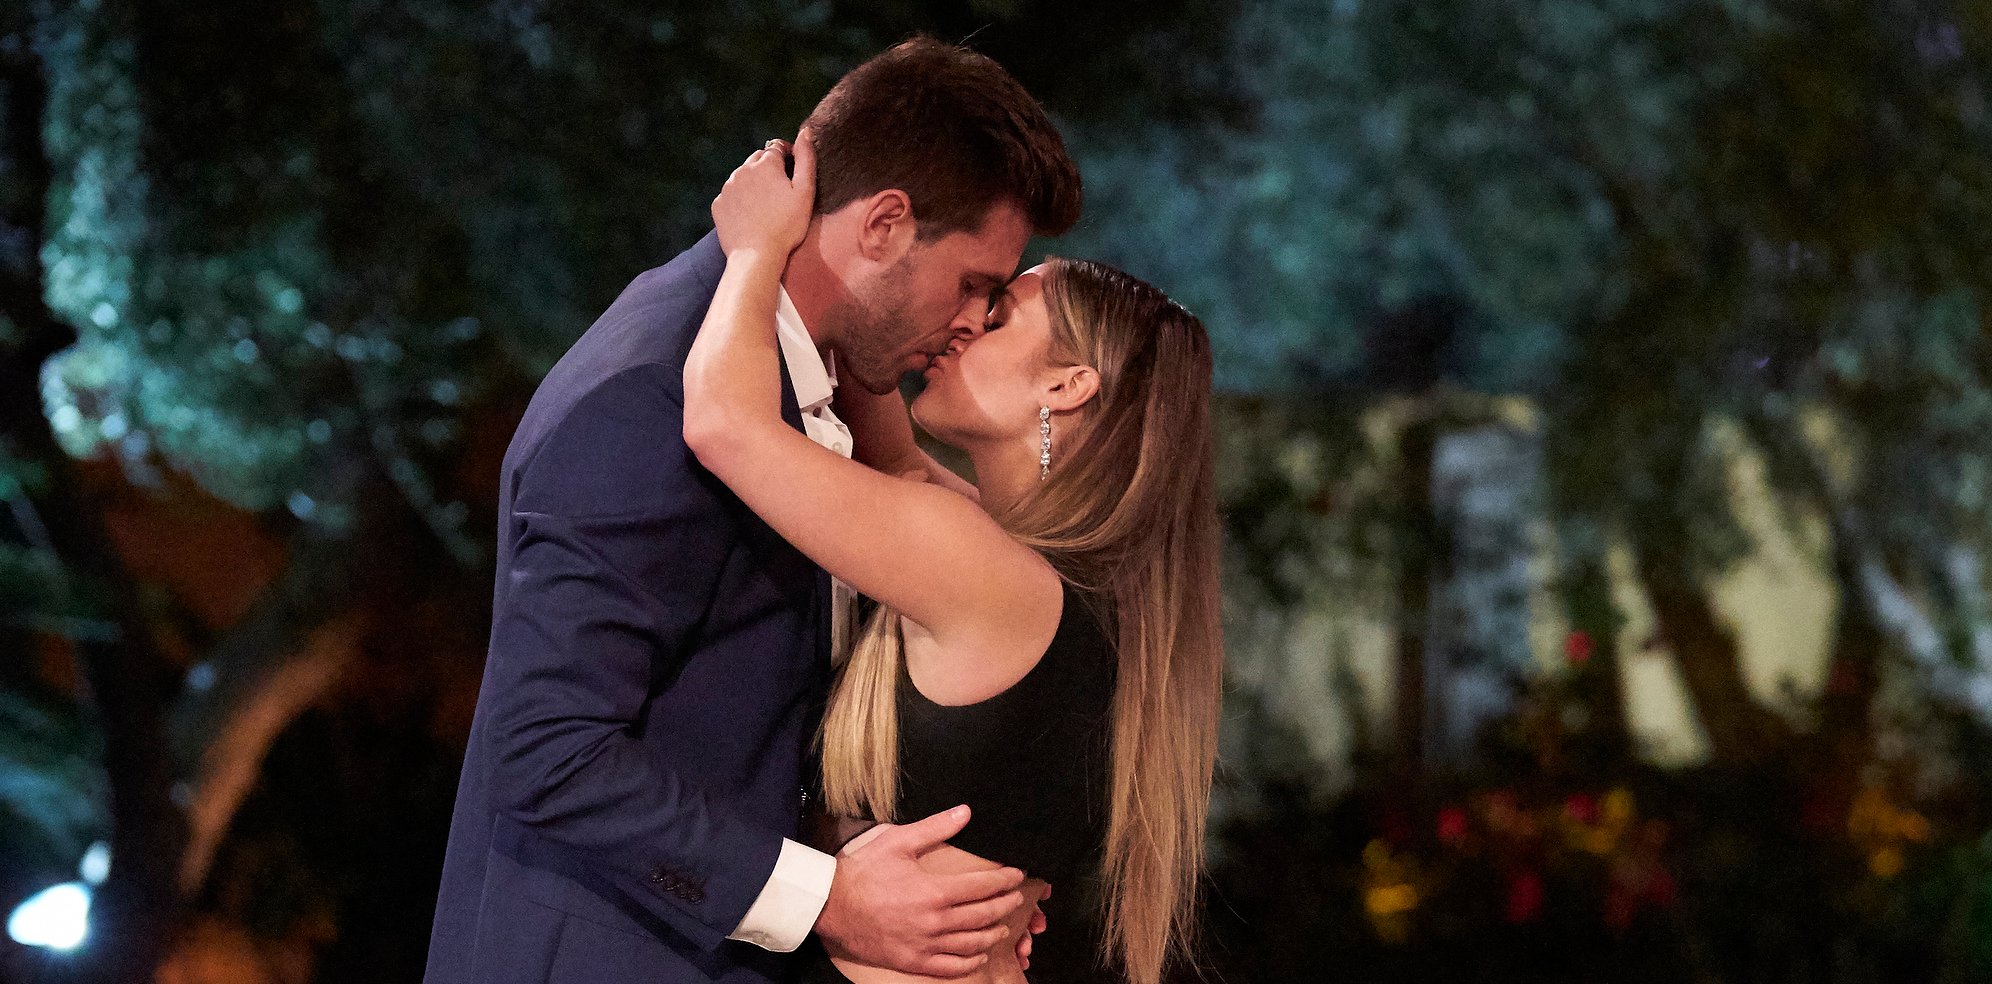 The Bachelorette stars Zach and Rachel share a kiss in a production still from this season.